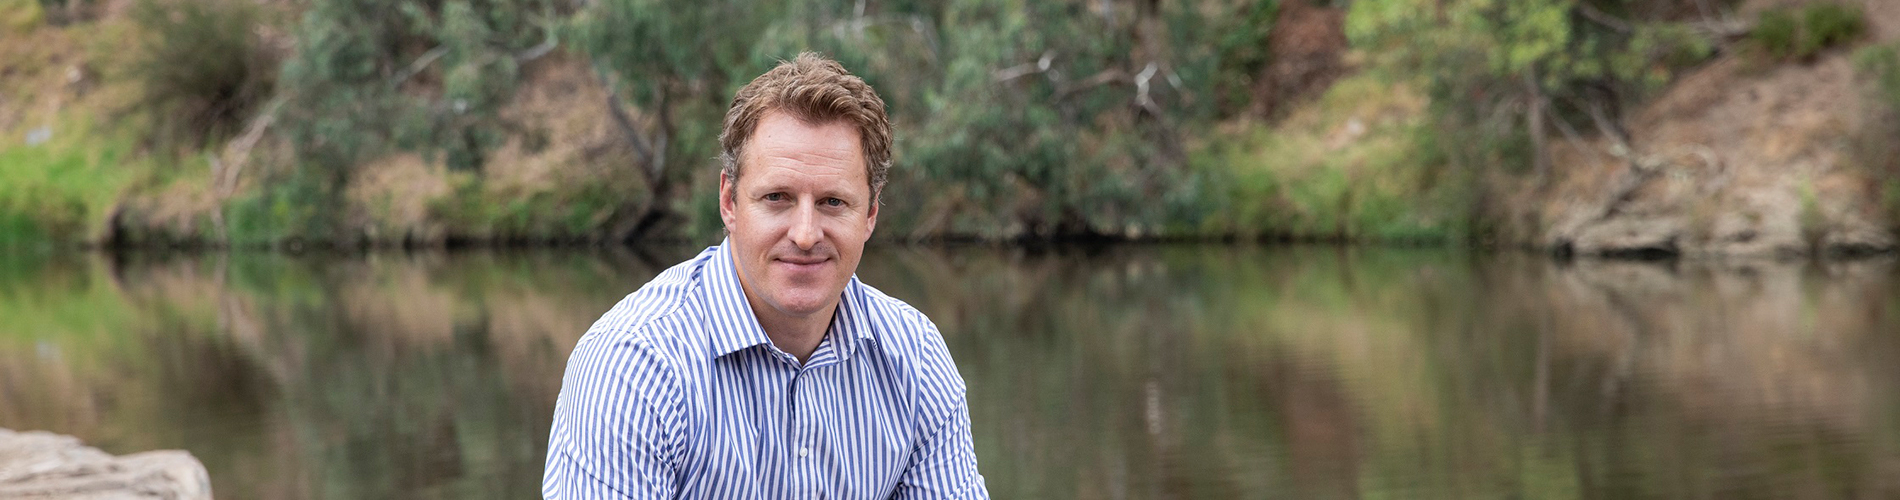 Parks Victoria’s Chief Operating Officer, Simon Talbot